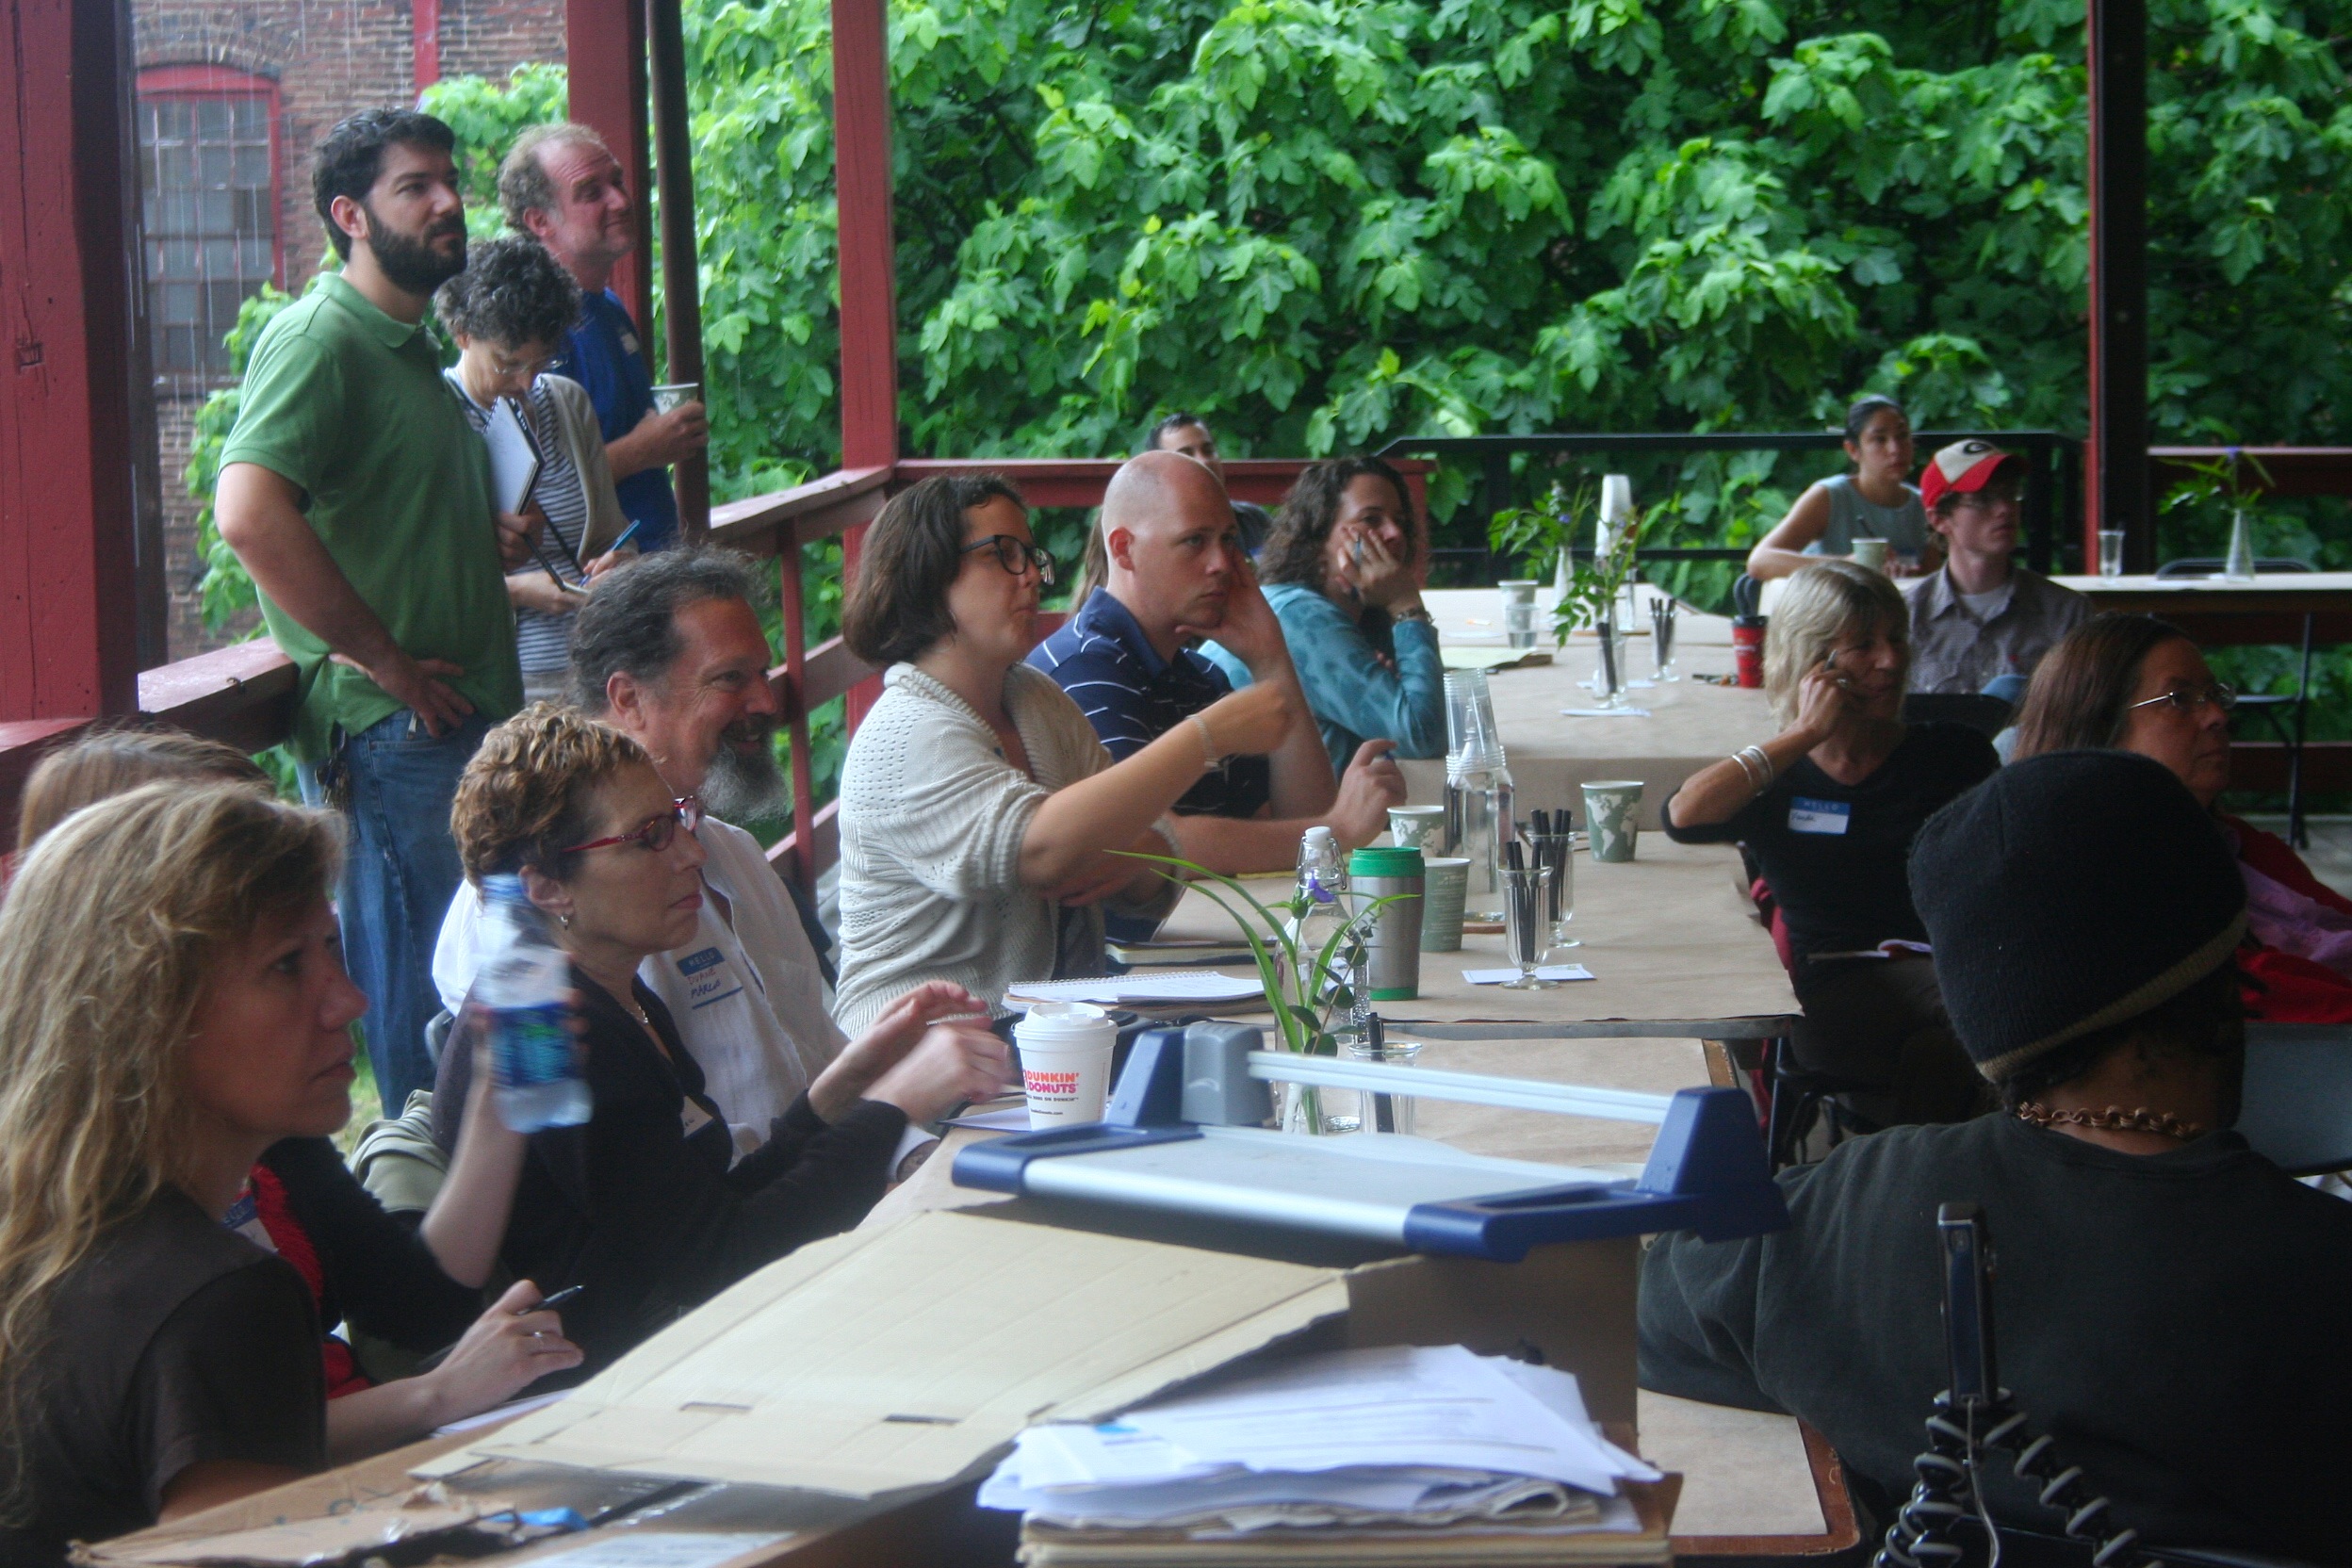 another-view-of-the-participants-at-the-growbot-symposium_4577276676_o.jpg